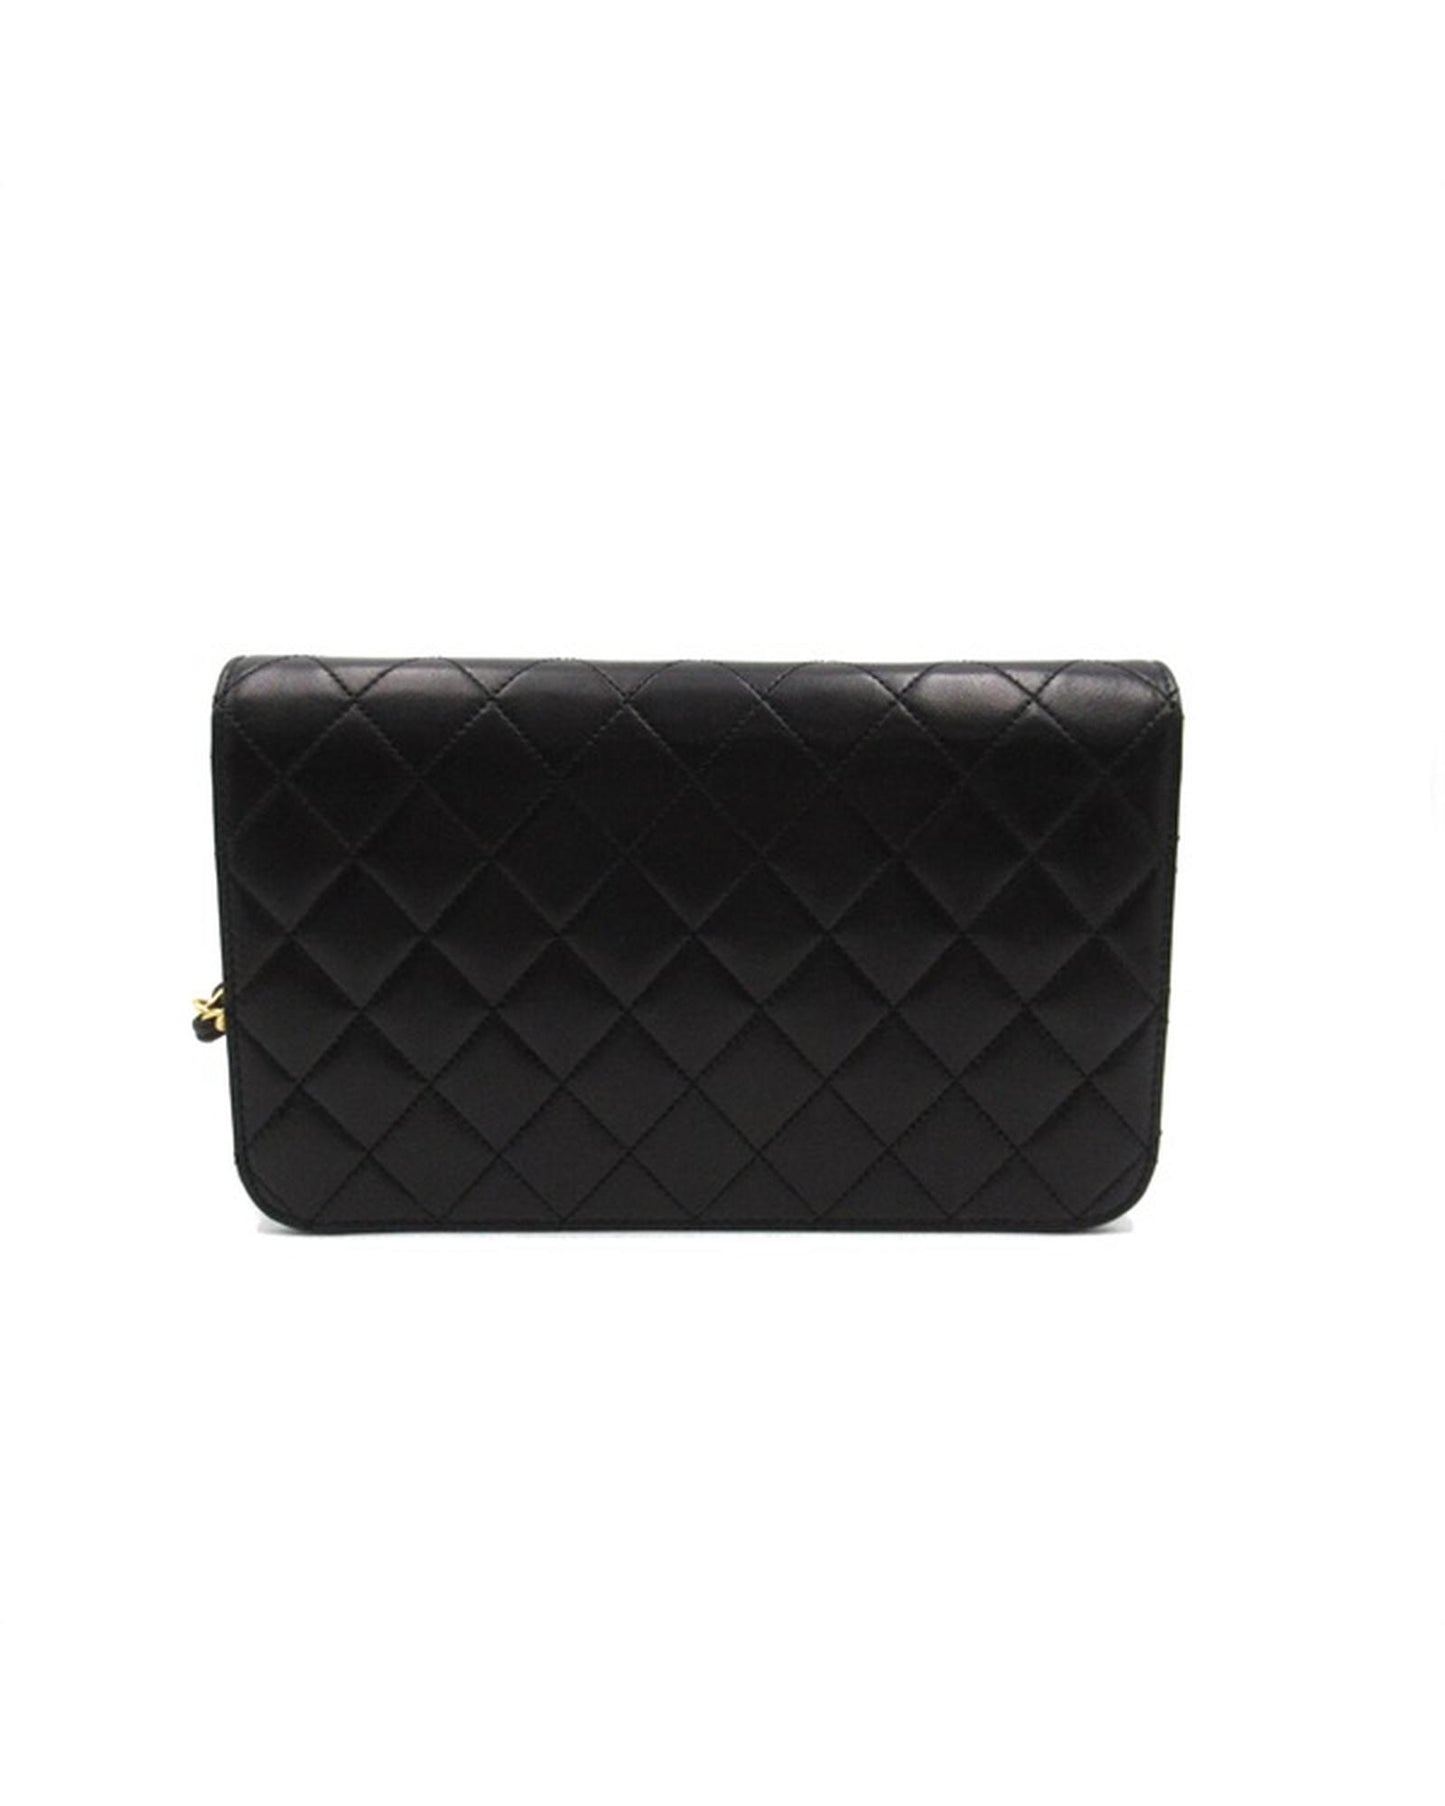 Chanel Women's Quilted Leather Full Flap Bag with CC Logo in Black